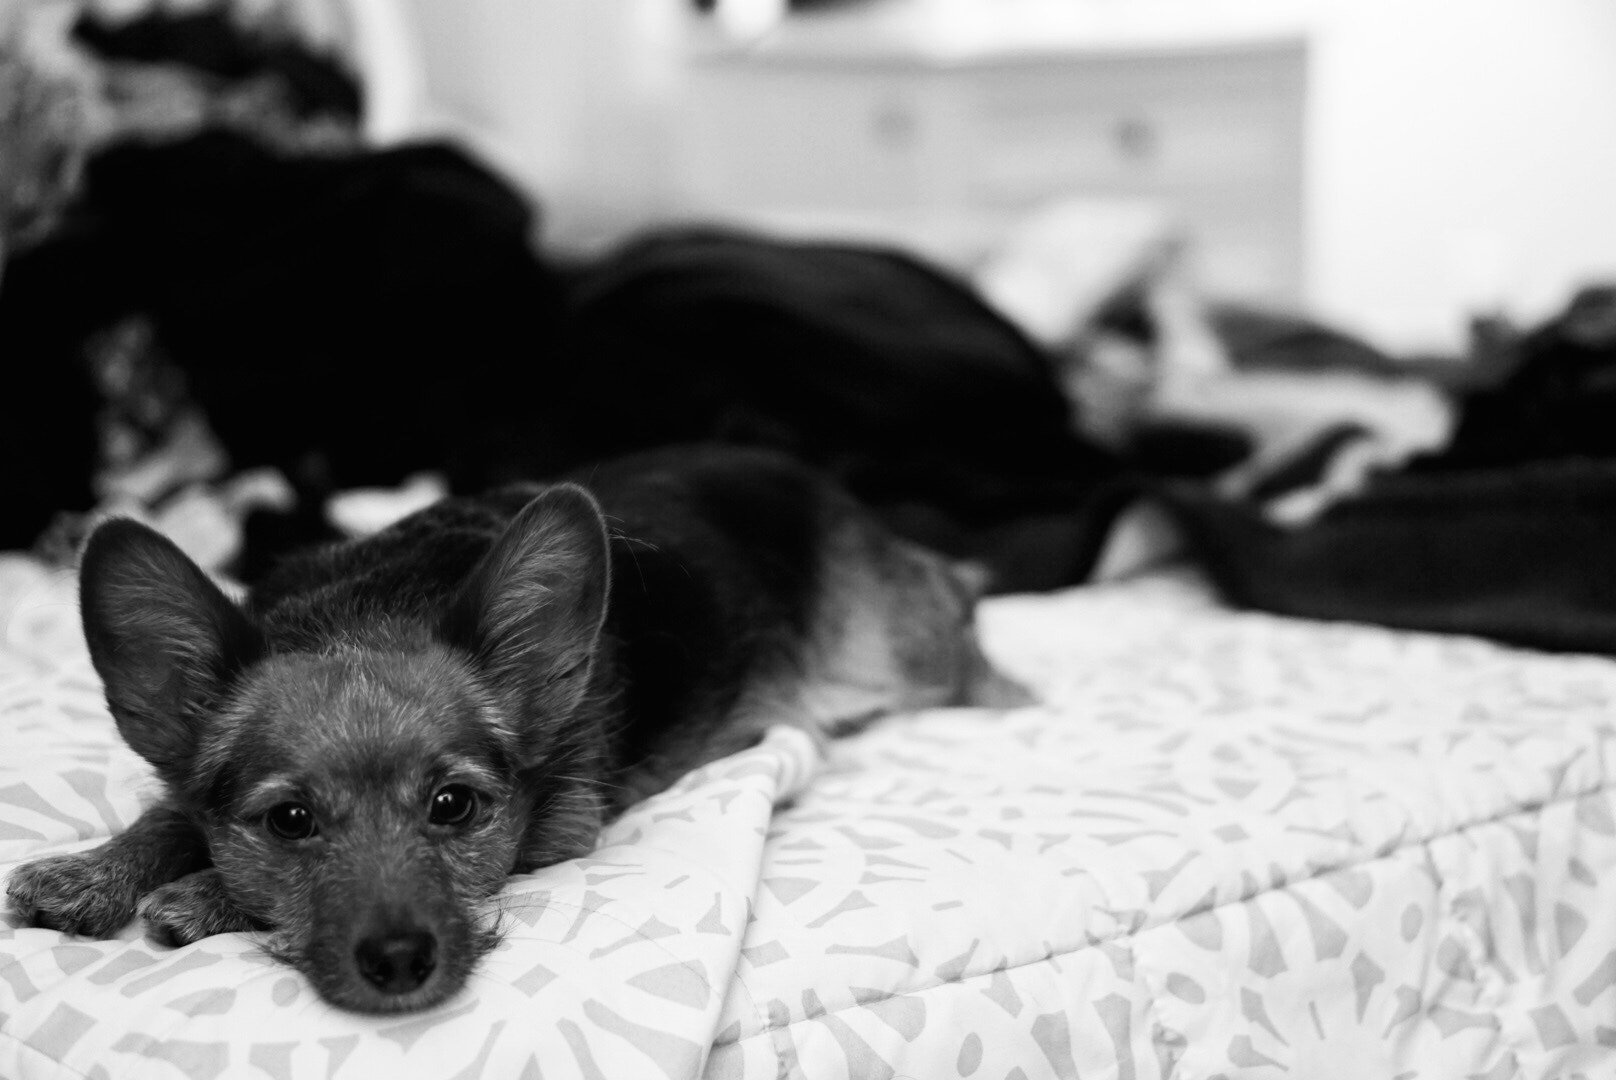 Sony a5100 sample photo. The apathetic dog on a bed full of laundry photography